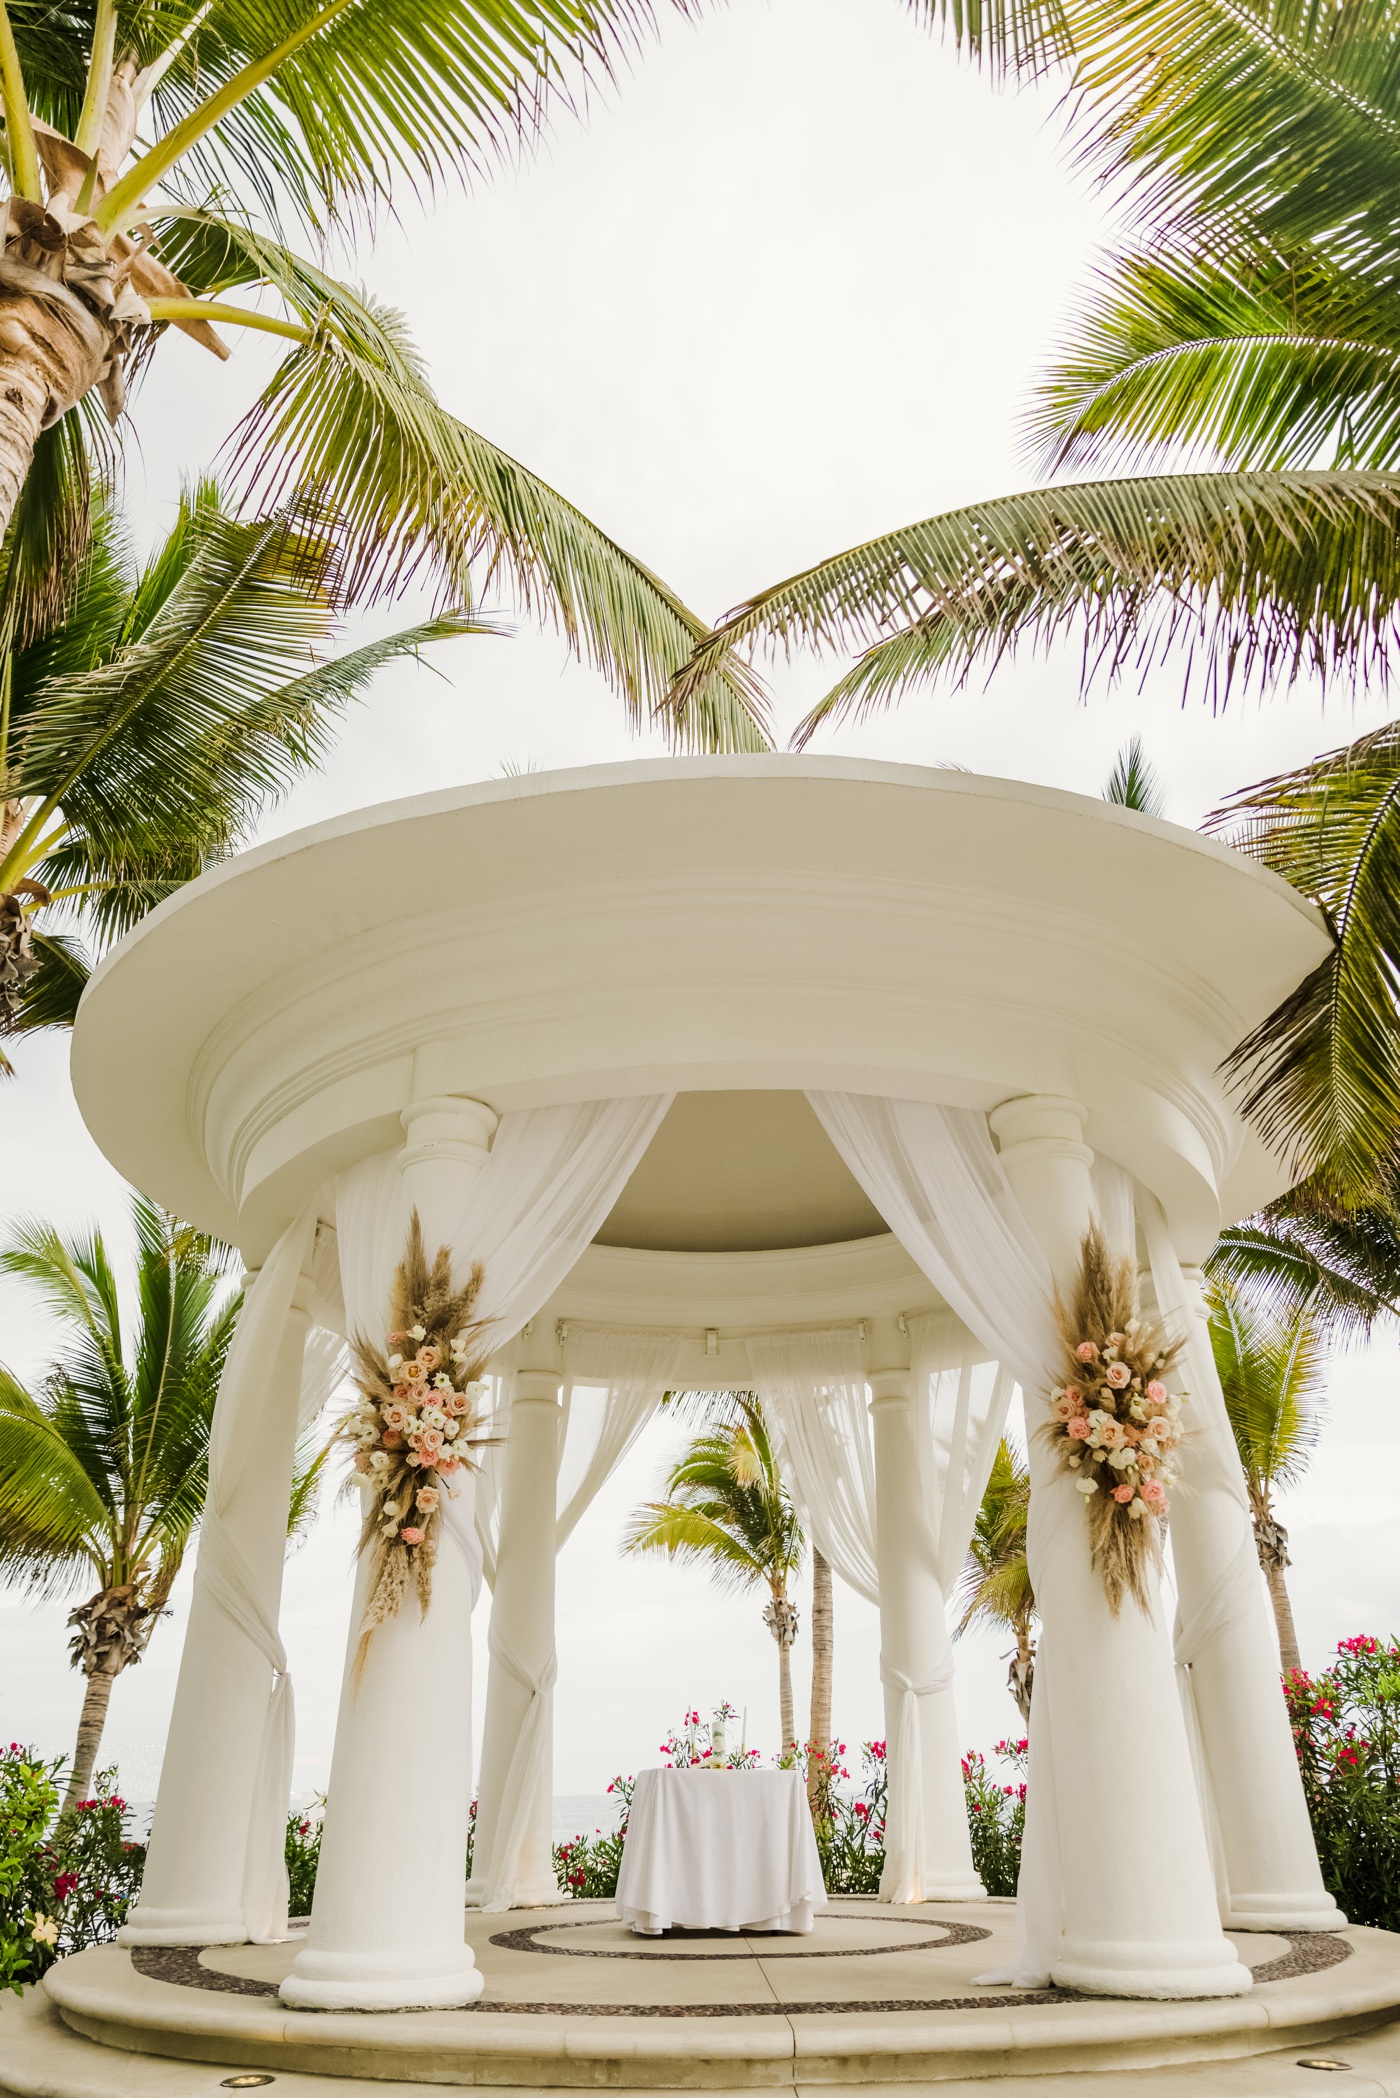 White gazebo decorated with pink flowers and pampas grass for a beach wedding